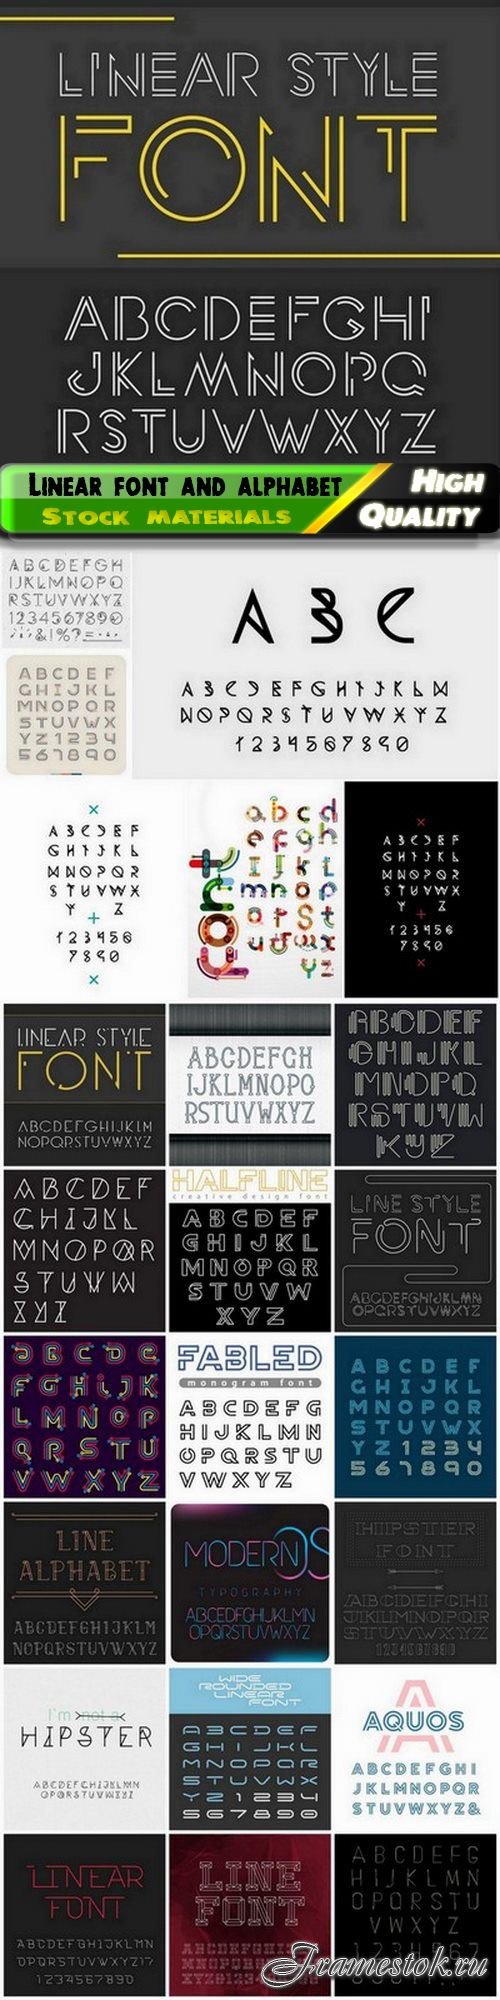 Linear font and alphabet letter and number 2 - 25 Eps